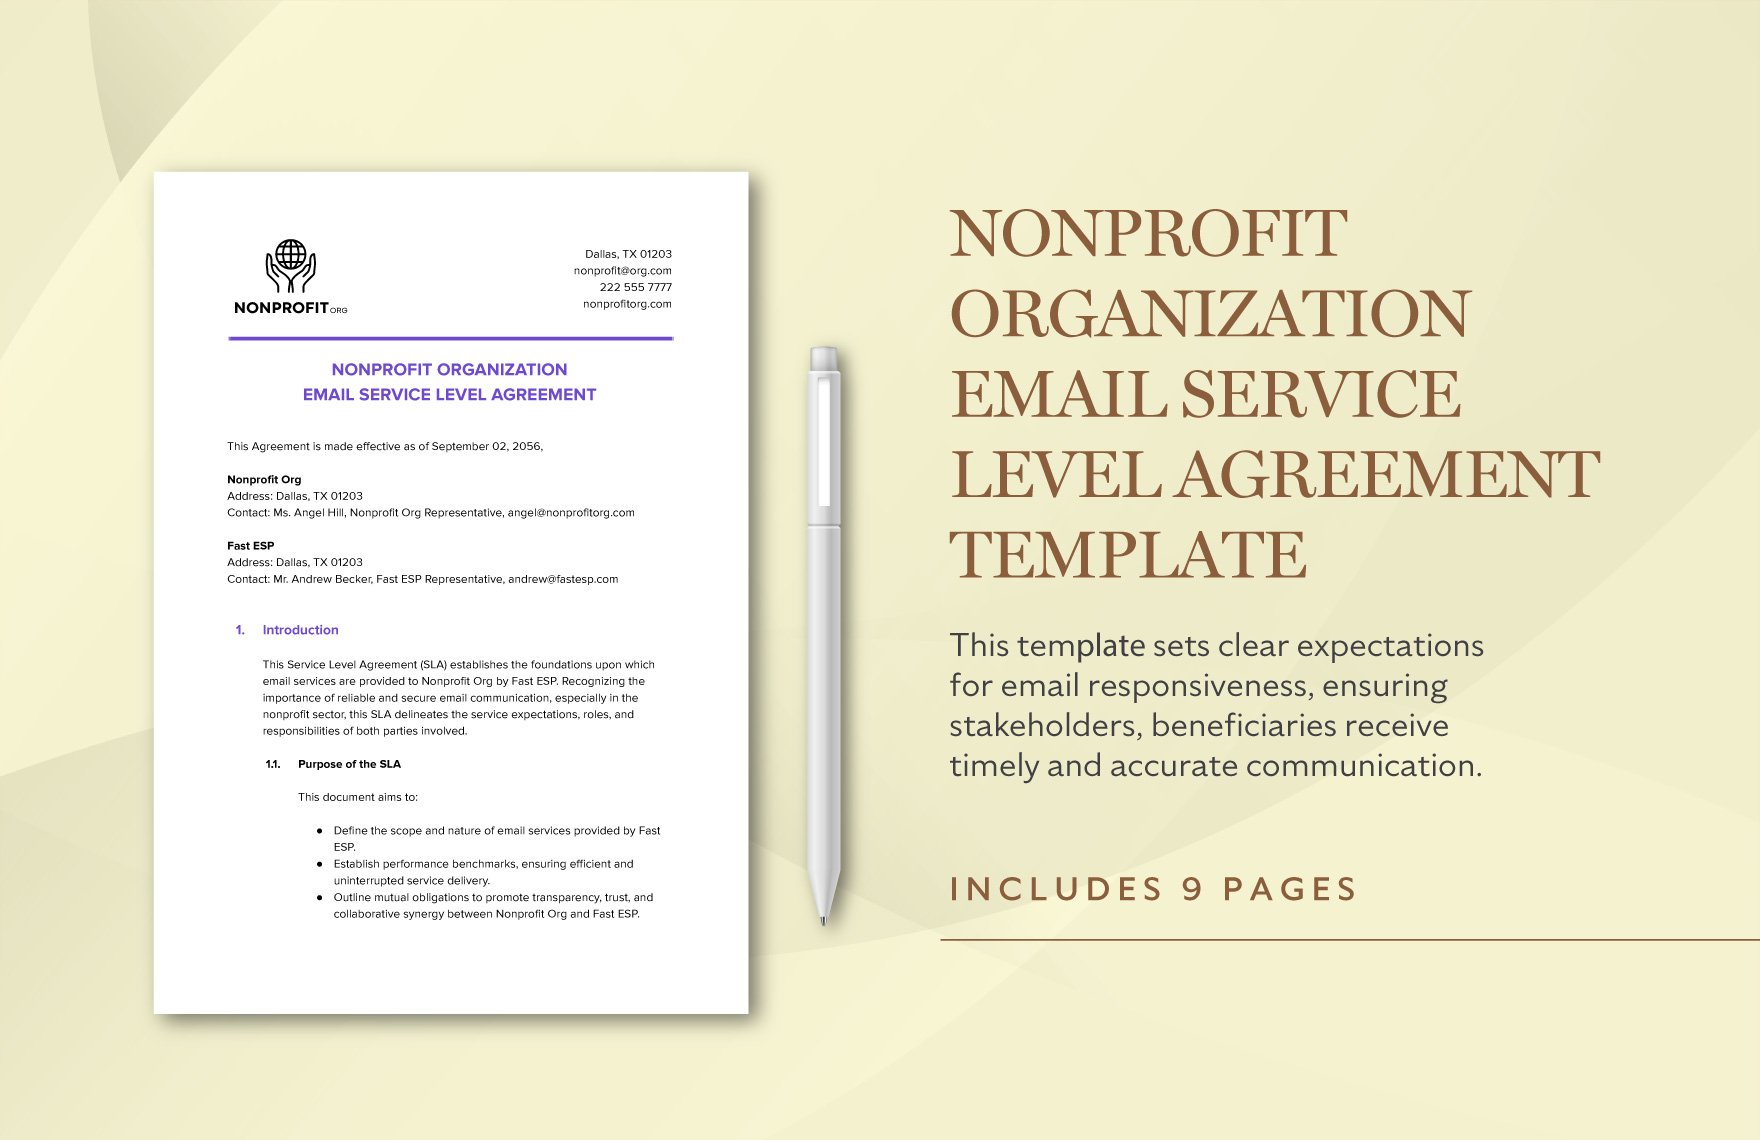 Nonprofit Organization Email Service Level Agreement Template in Word, Google Docs, PDF